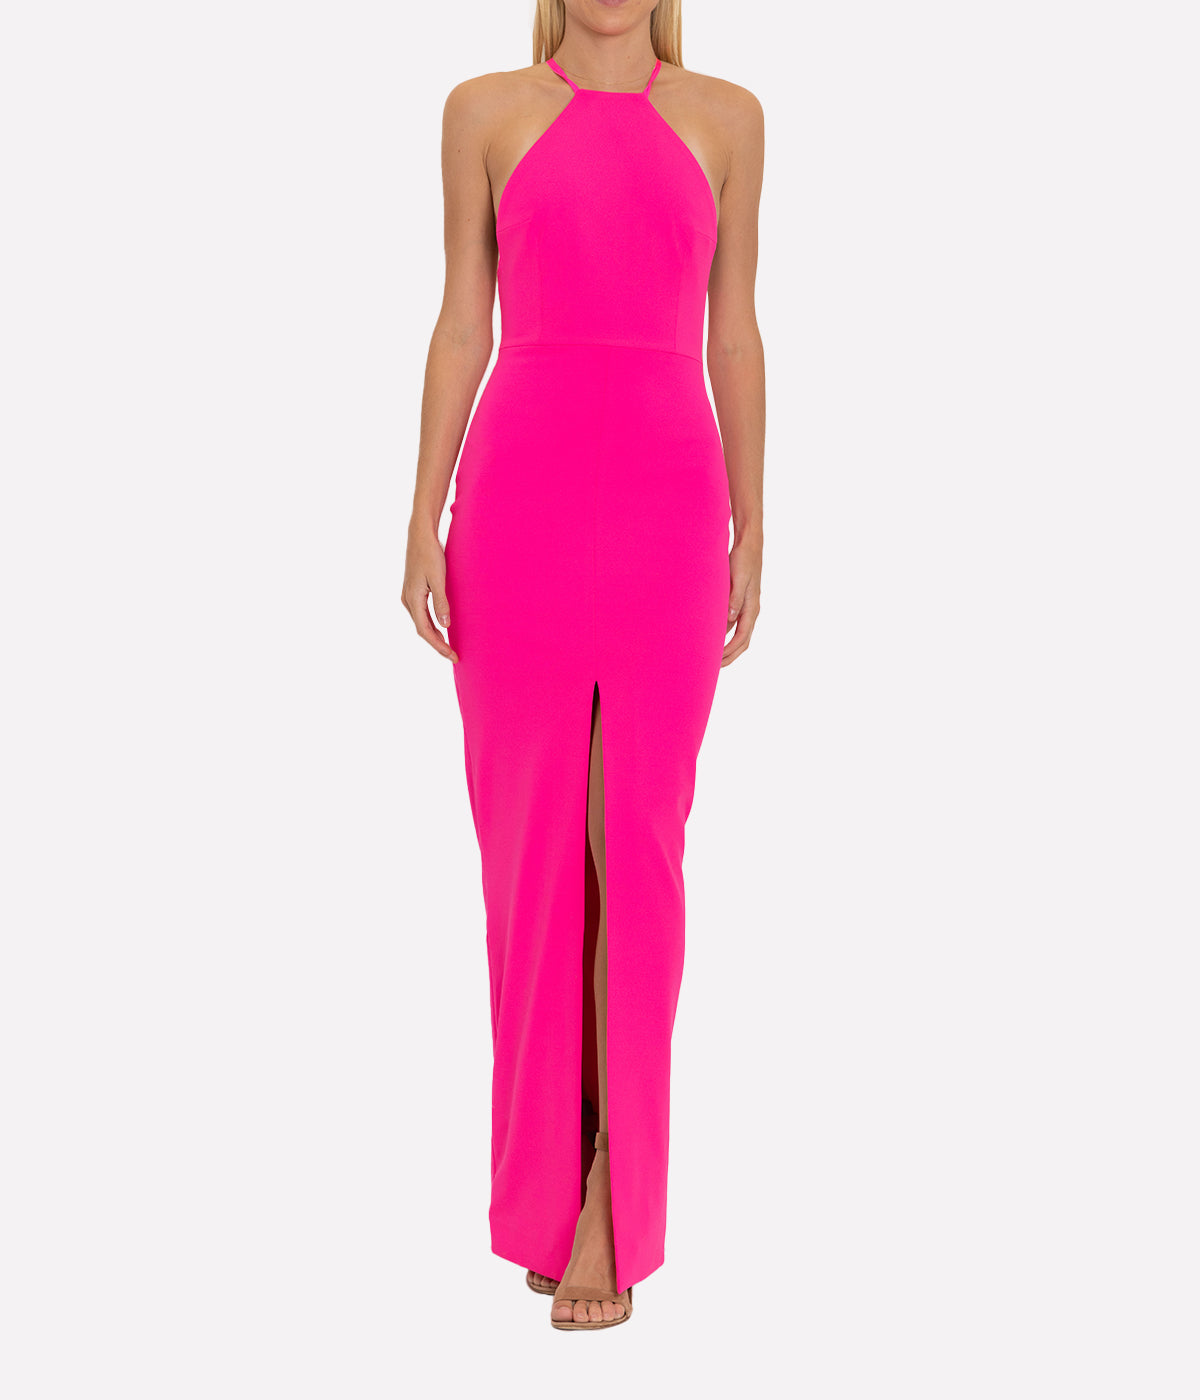 Lila Maxi Dress in Hot Pink